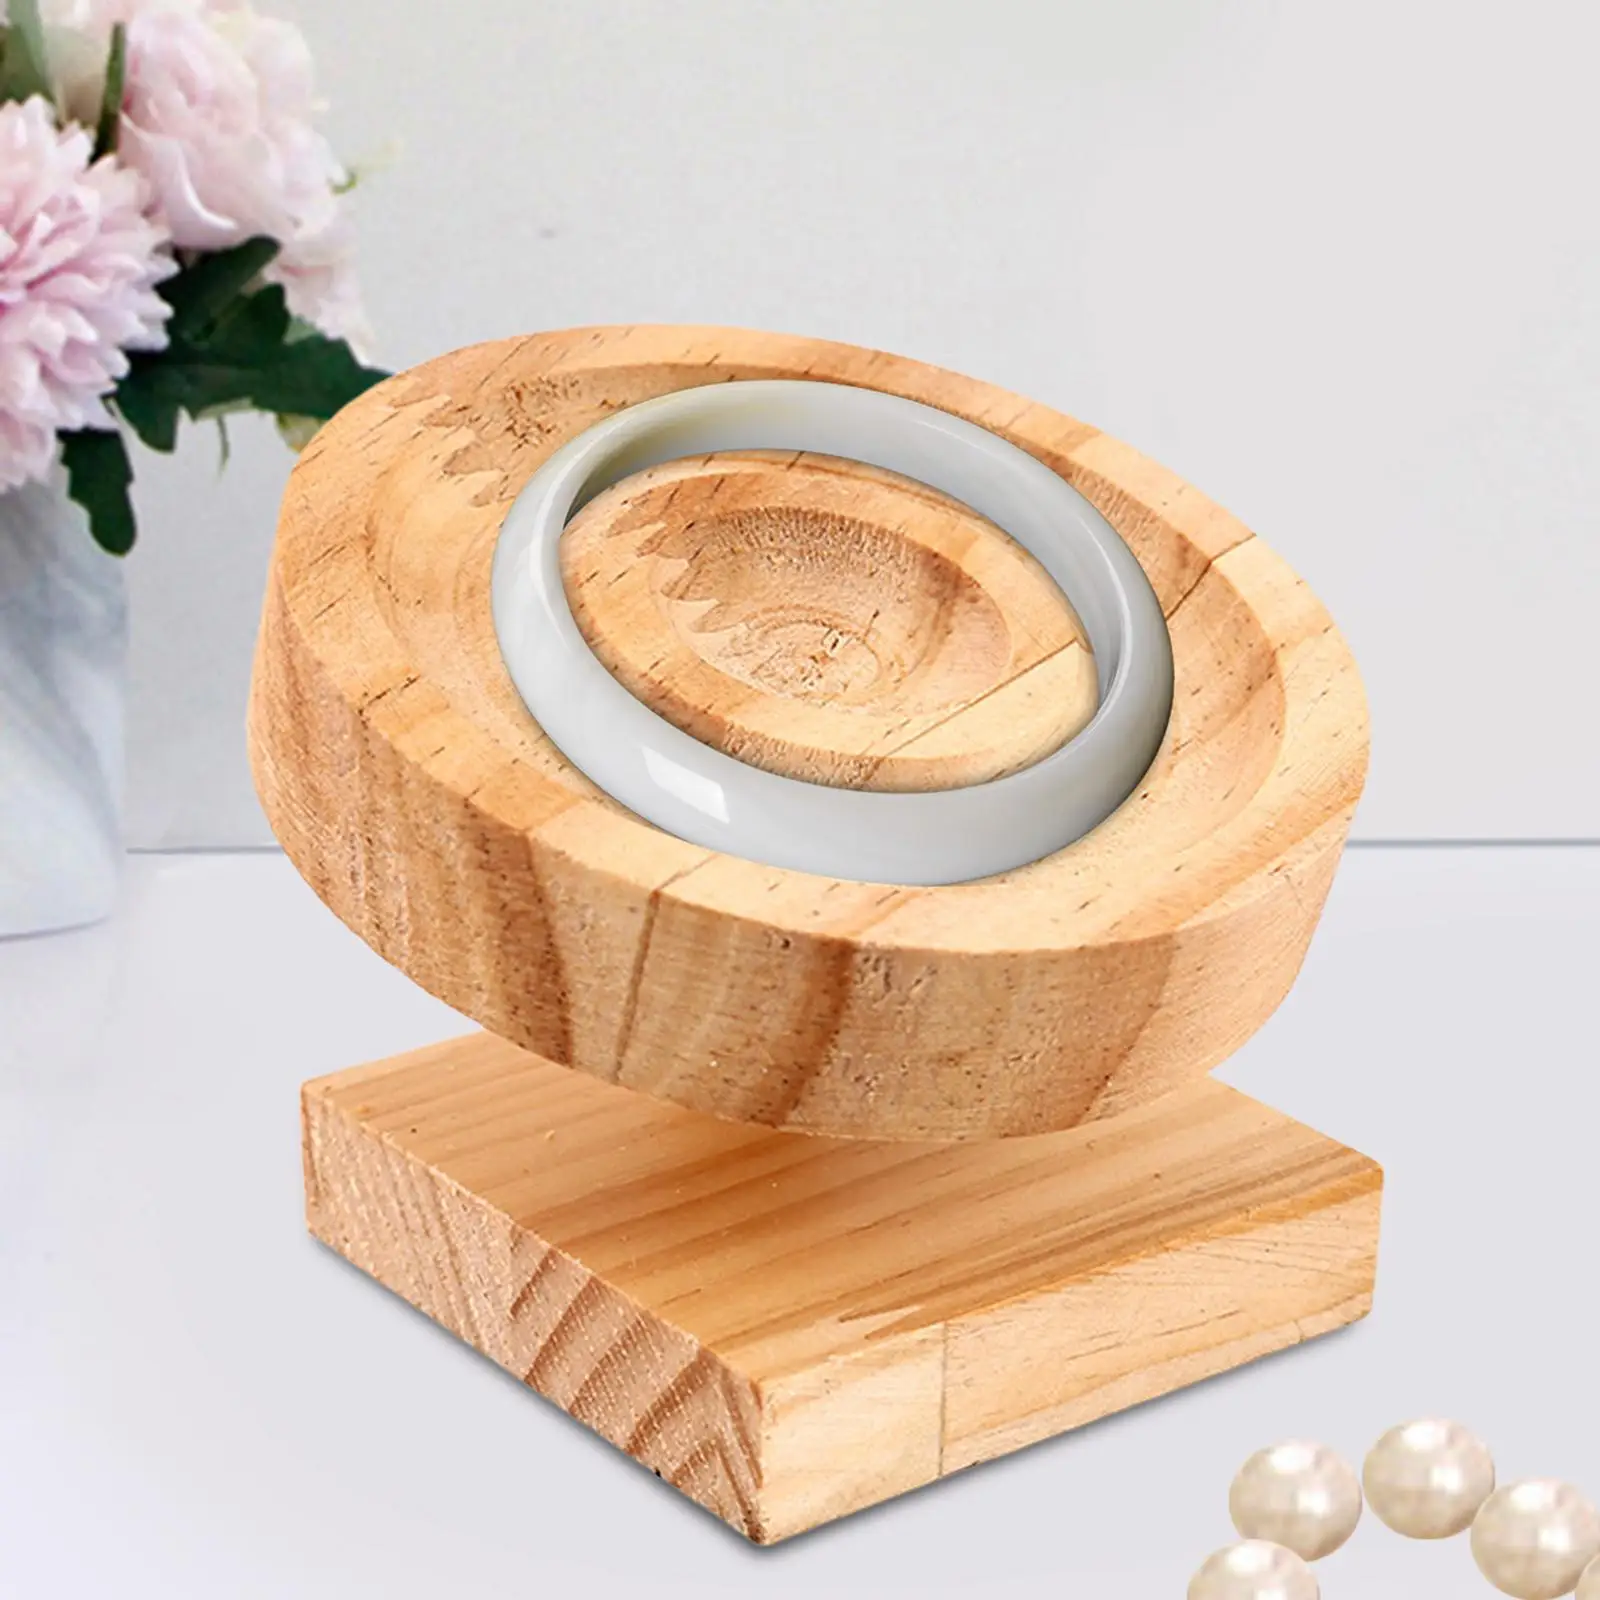 

Round Bracelet Bangle Display Tray Stand Birthday Gift Organizer Holder Wooden for Store Countertop Shop Showcase Retail